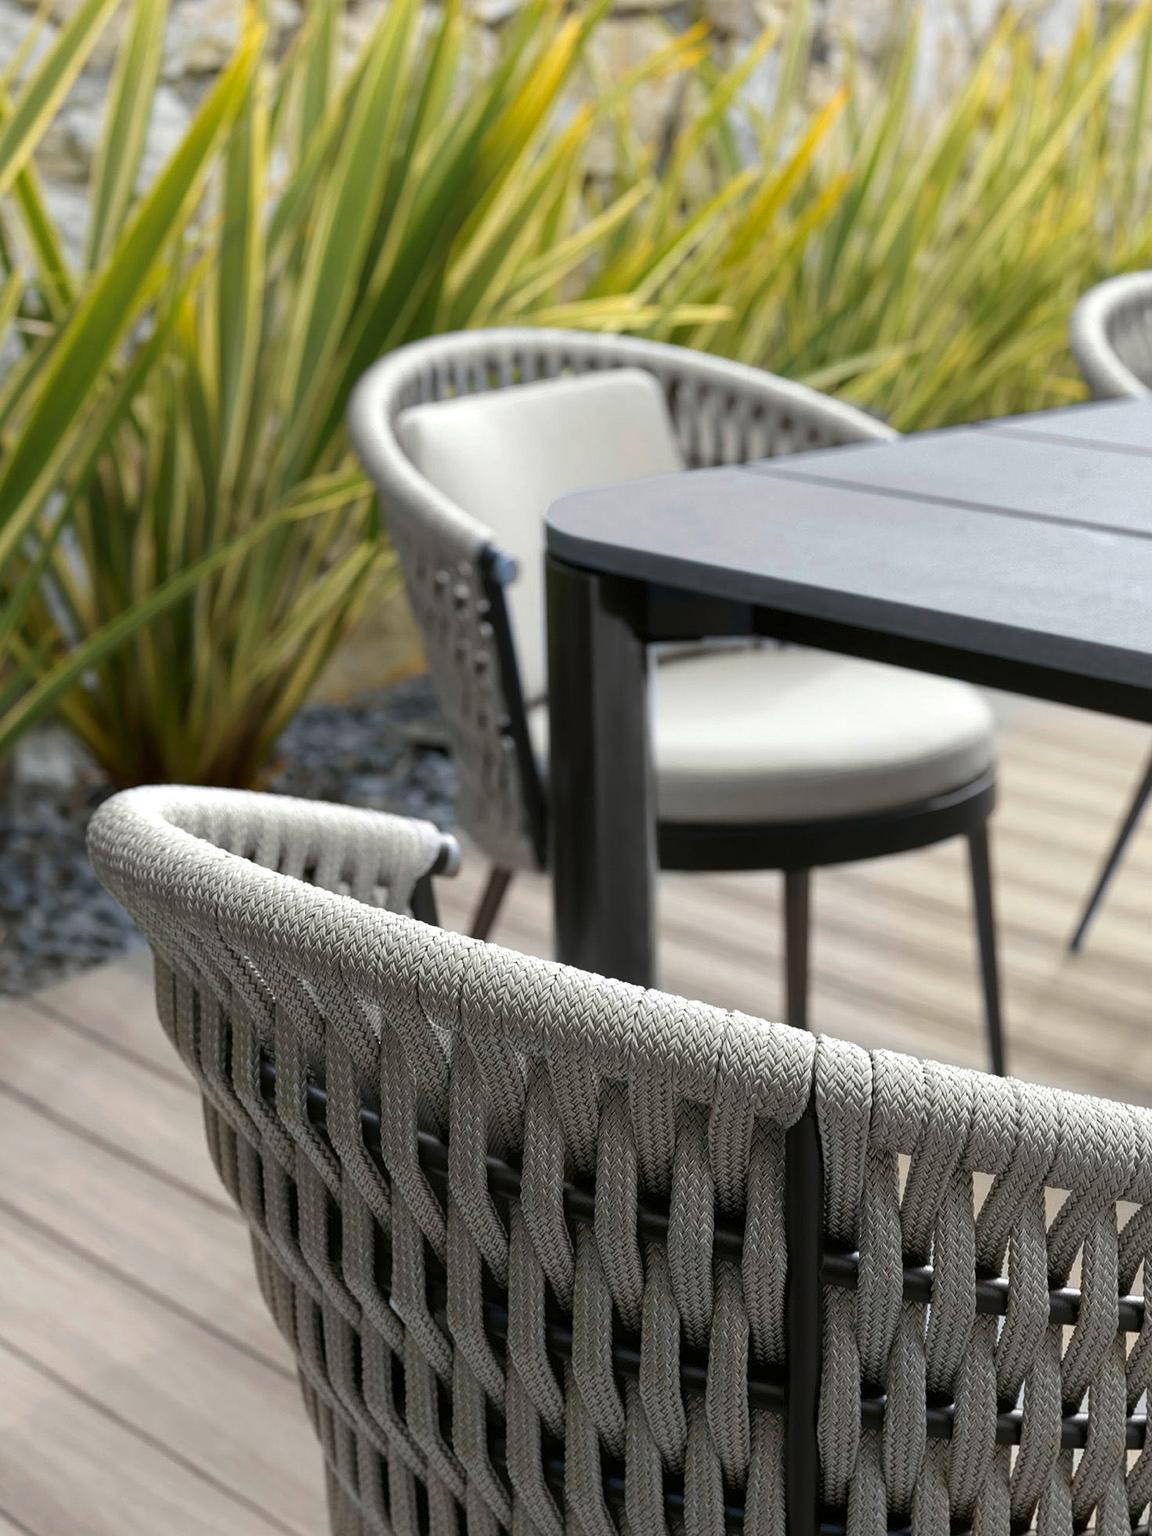 Stainless Steel Giorgio Collection Dune Outdoor Garden Chair  For Sale